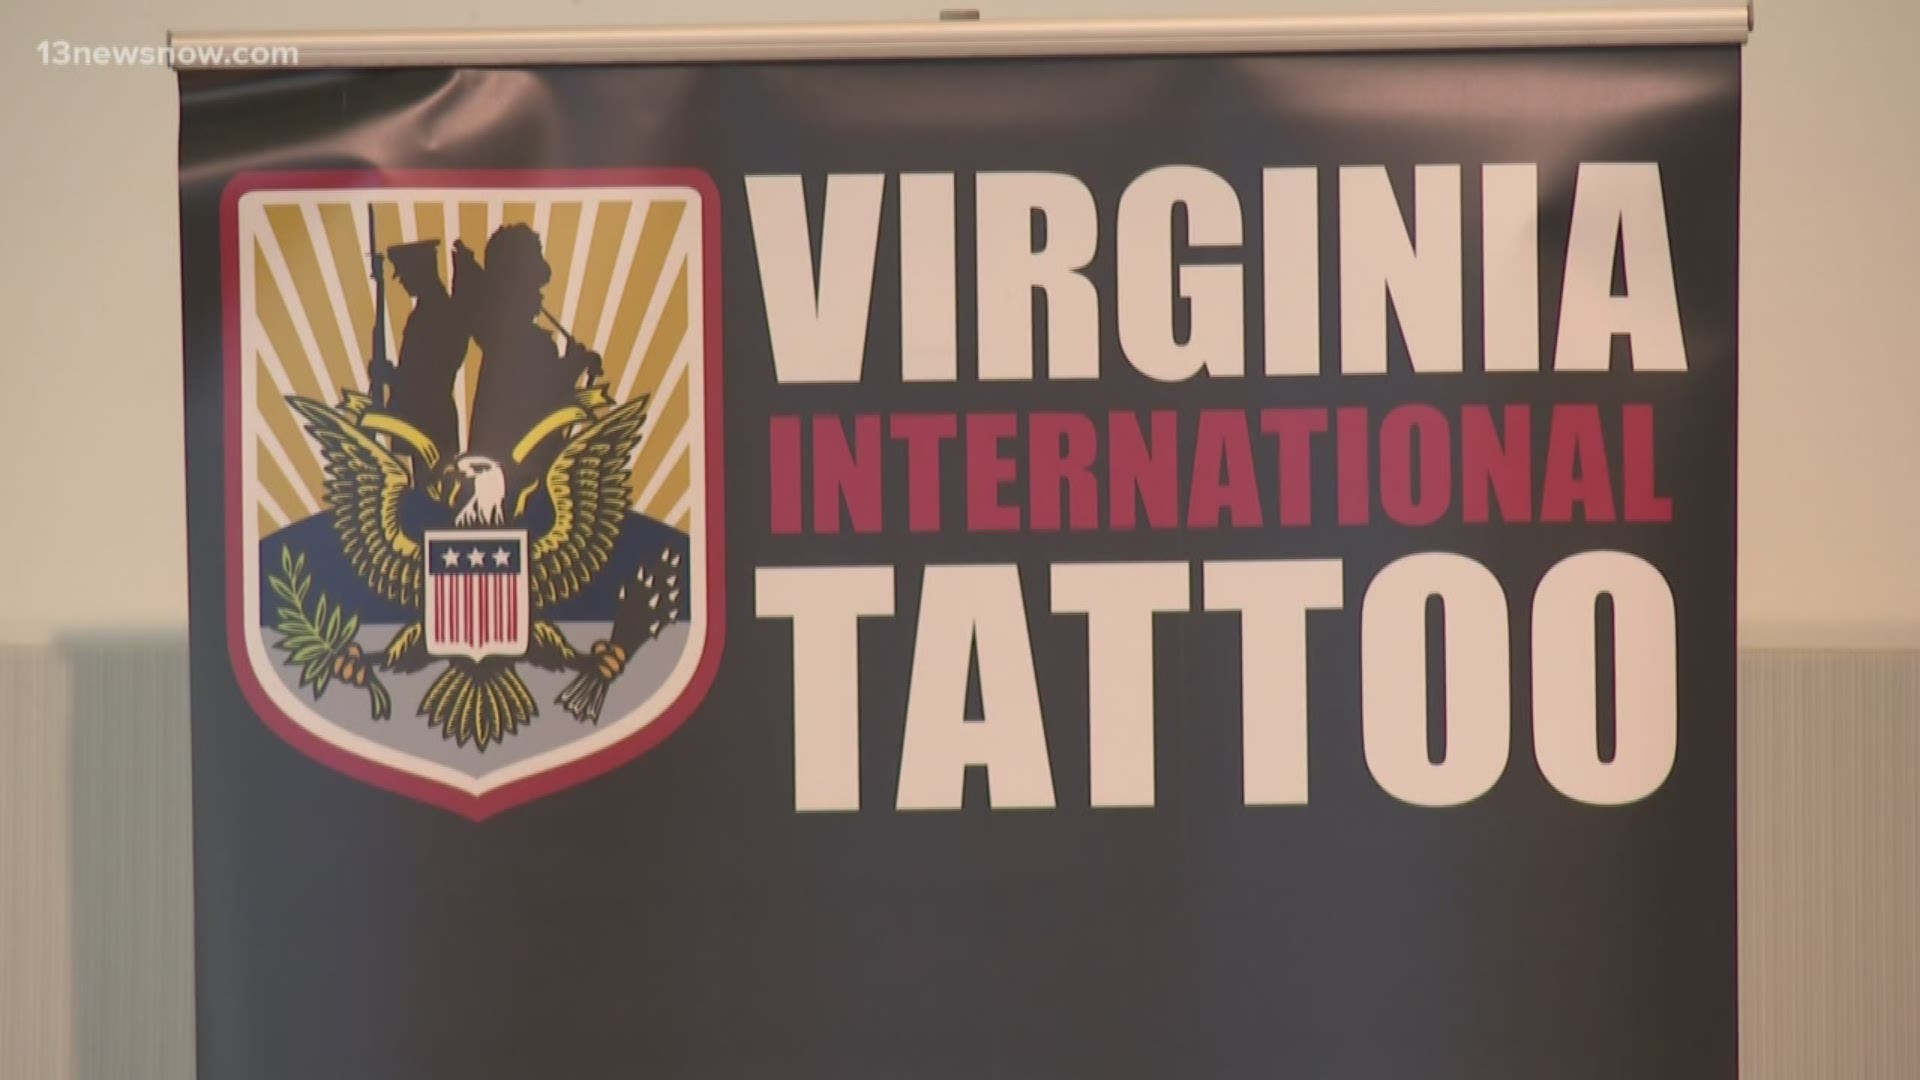 13News Now Mike Gooding has a preview of the 2020 Virginia International Tattoo and how this year's event will honor WWII heroes.